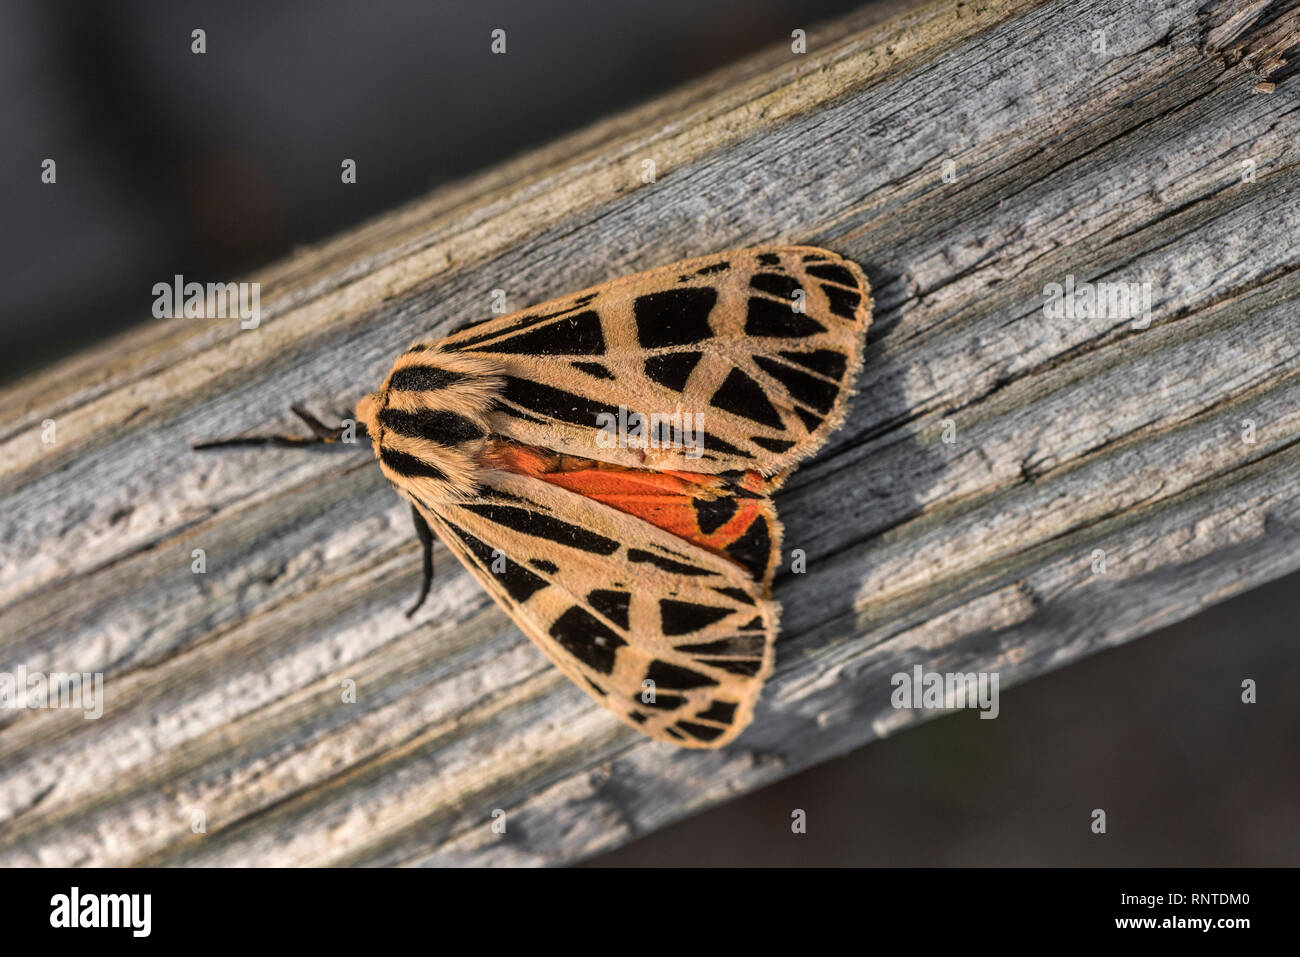 Harnessed Moth or Apantesis phalerata with multi-colors during Fall season in North Central Florida. Stock Photo